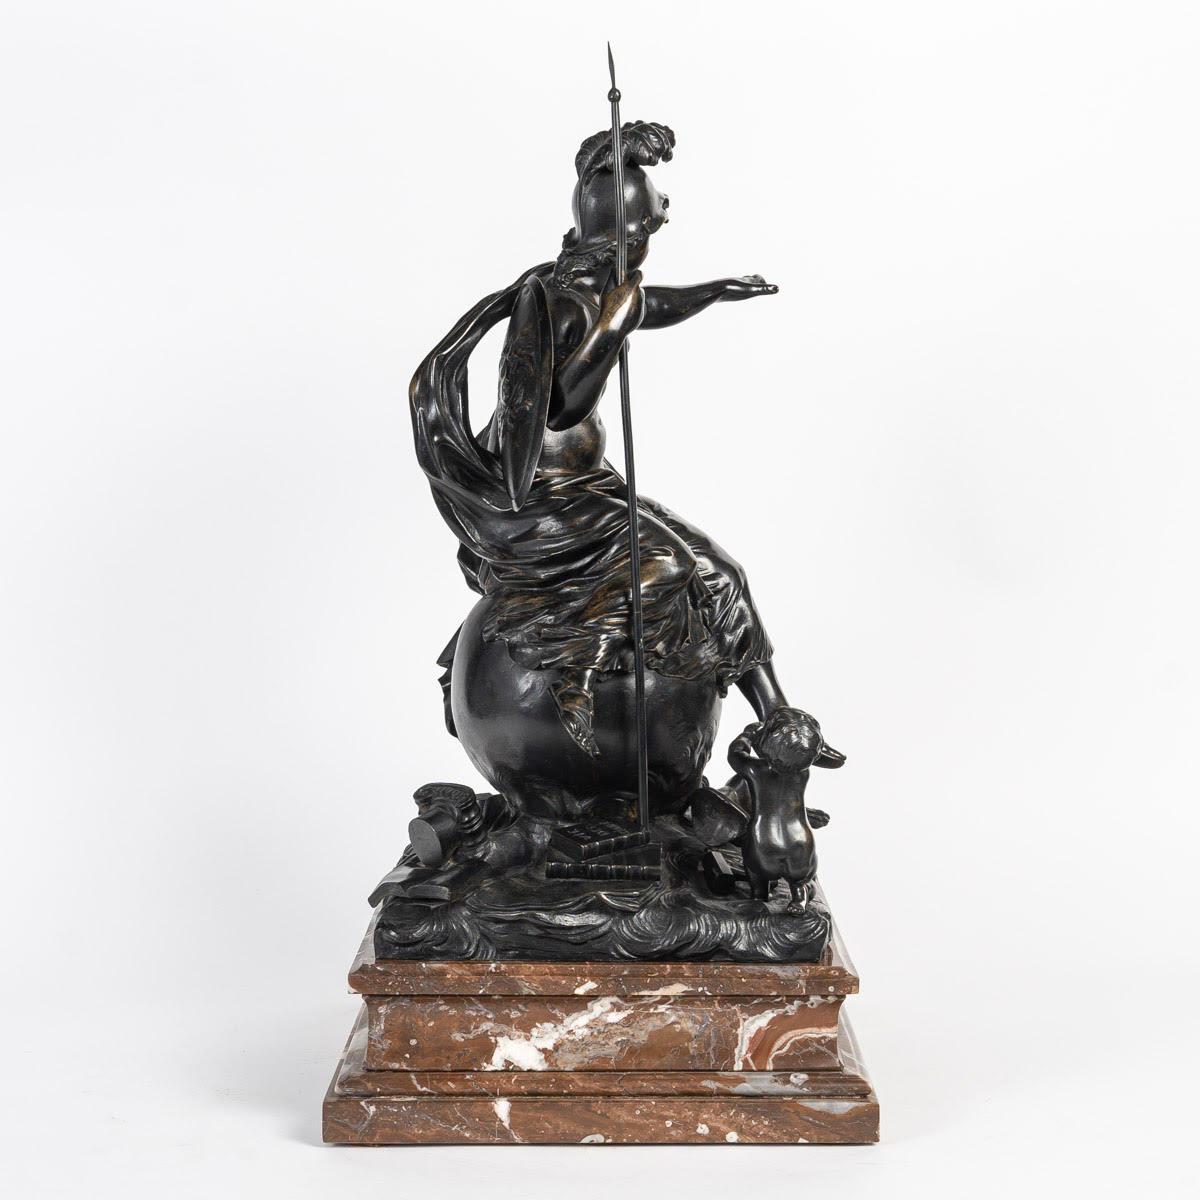 Bronze Sculpture of a Helmeted Woman Surrounded by Cherubs, Napoleon III Period. For Sale 7